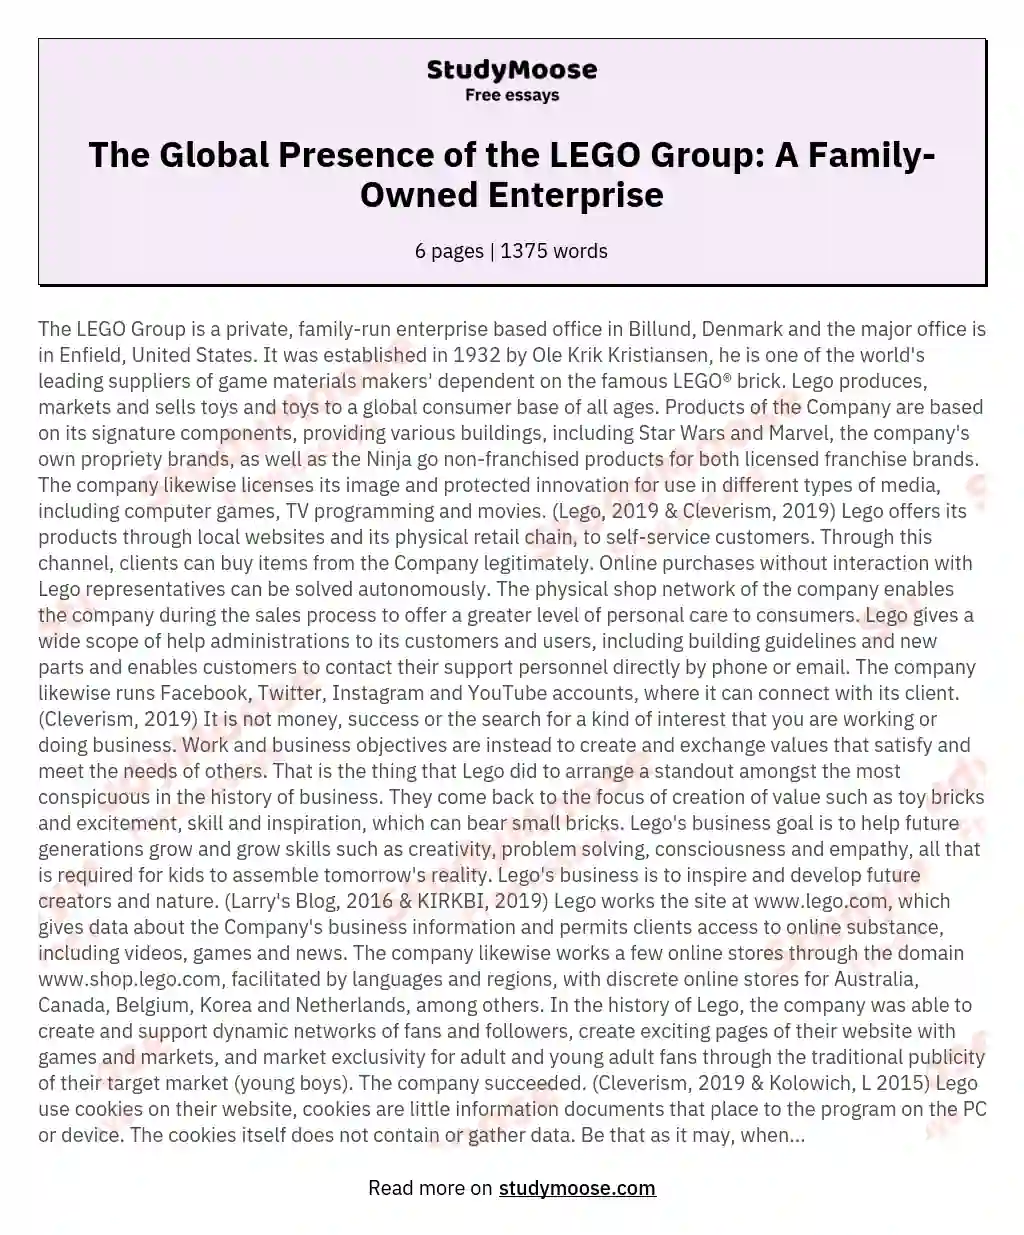 The Global Presence of the LEGO Group: A Family-Owned Enterprise essay